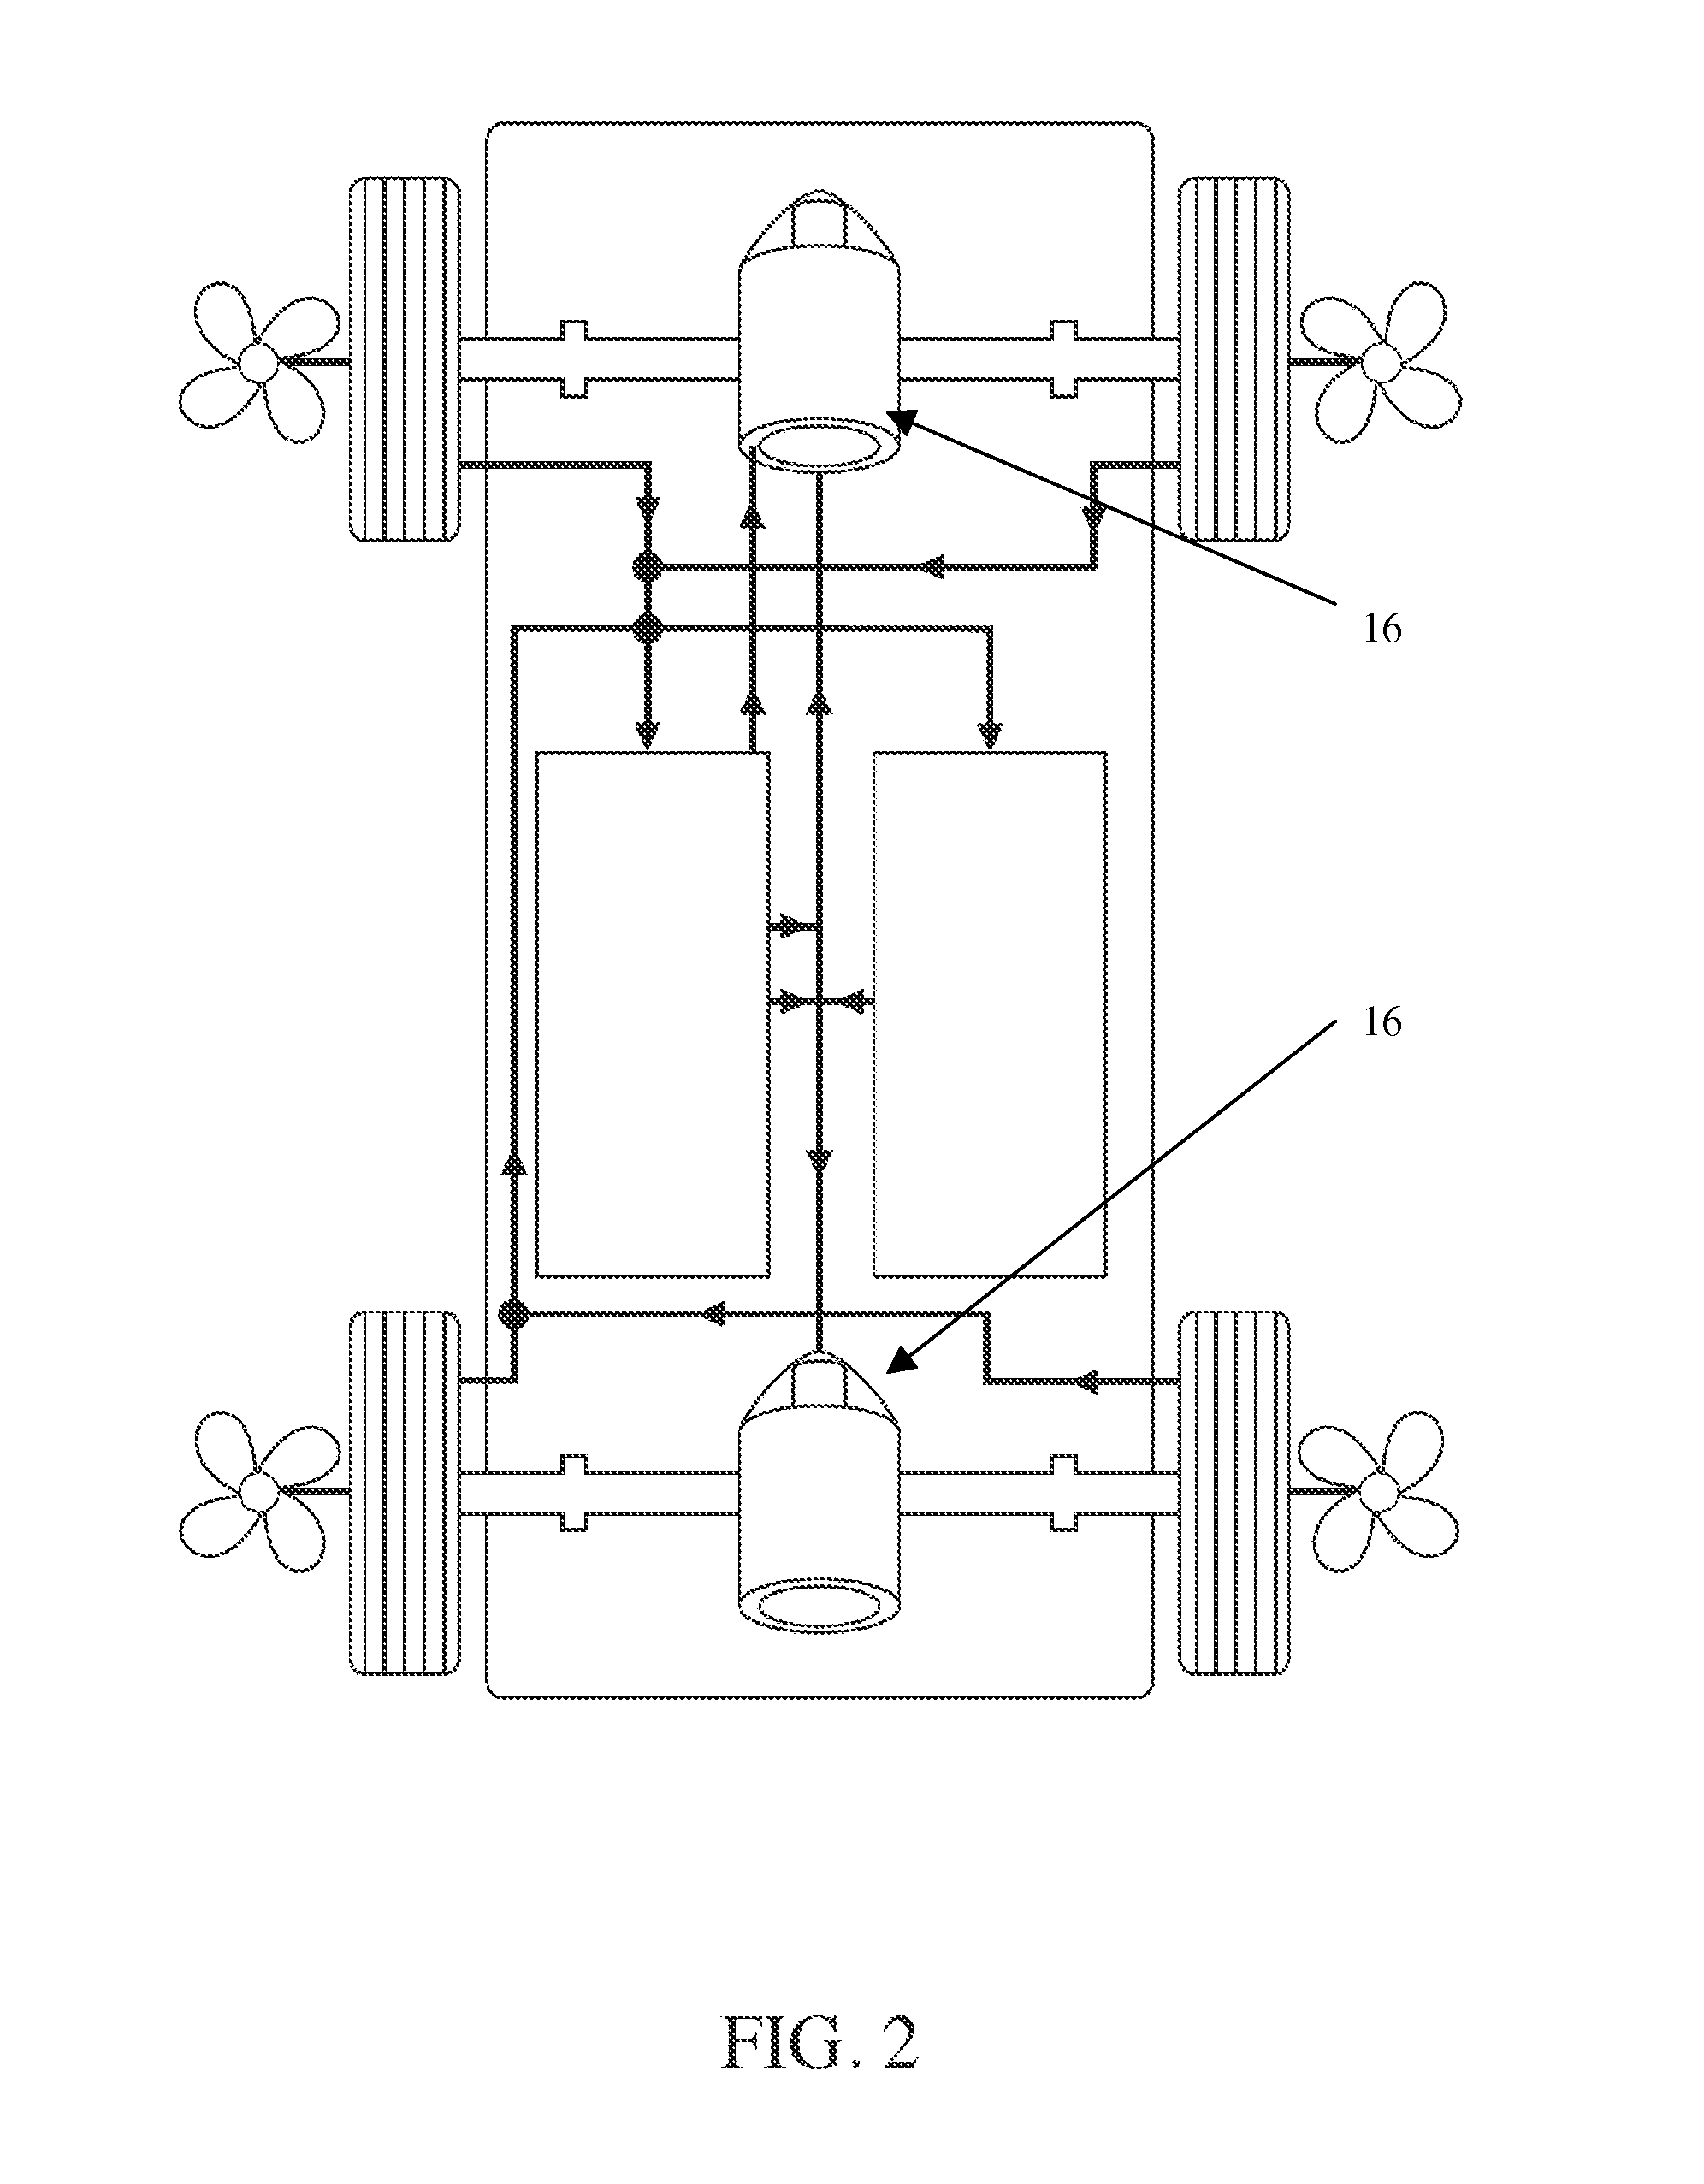 Self rechargeable synergy drive for a motor vehicle